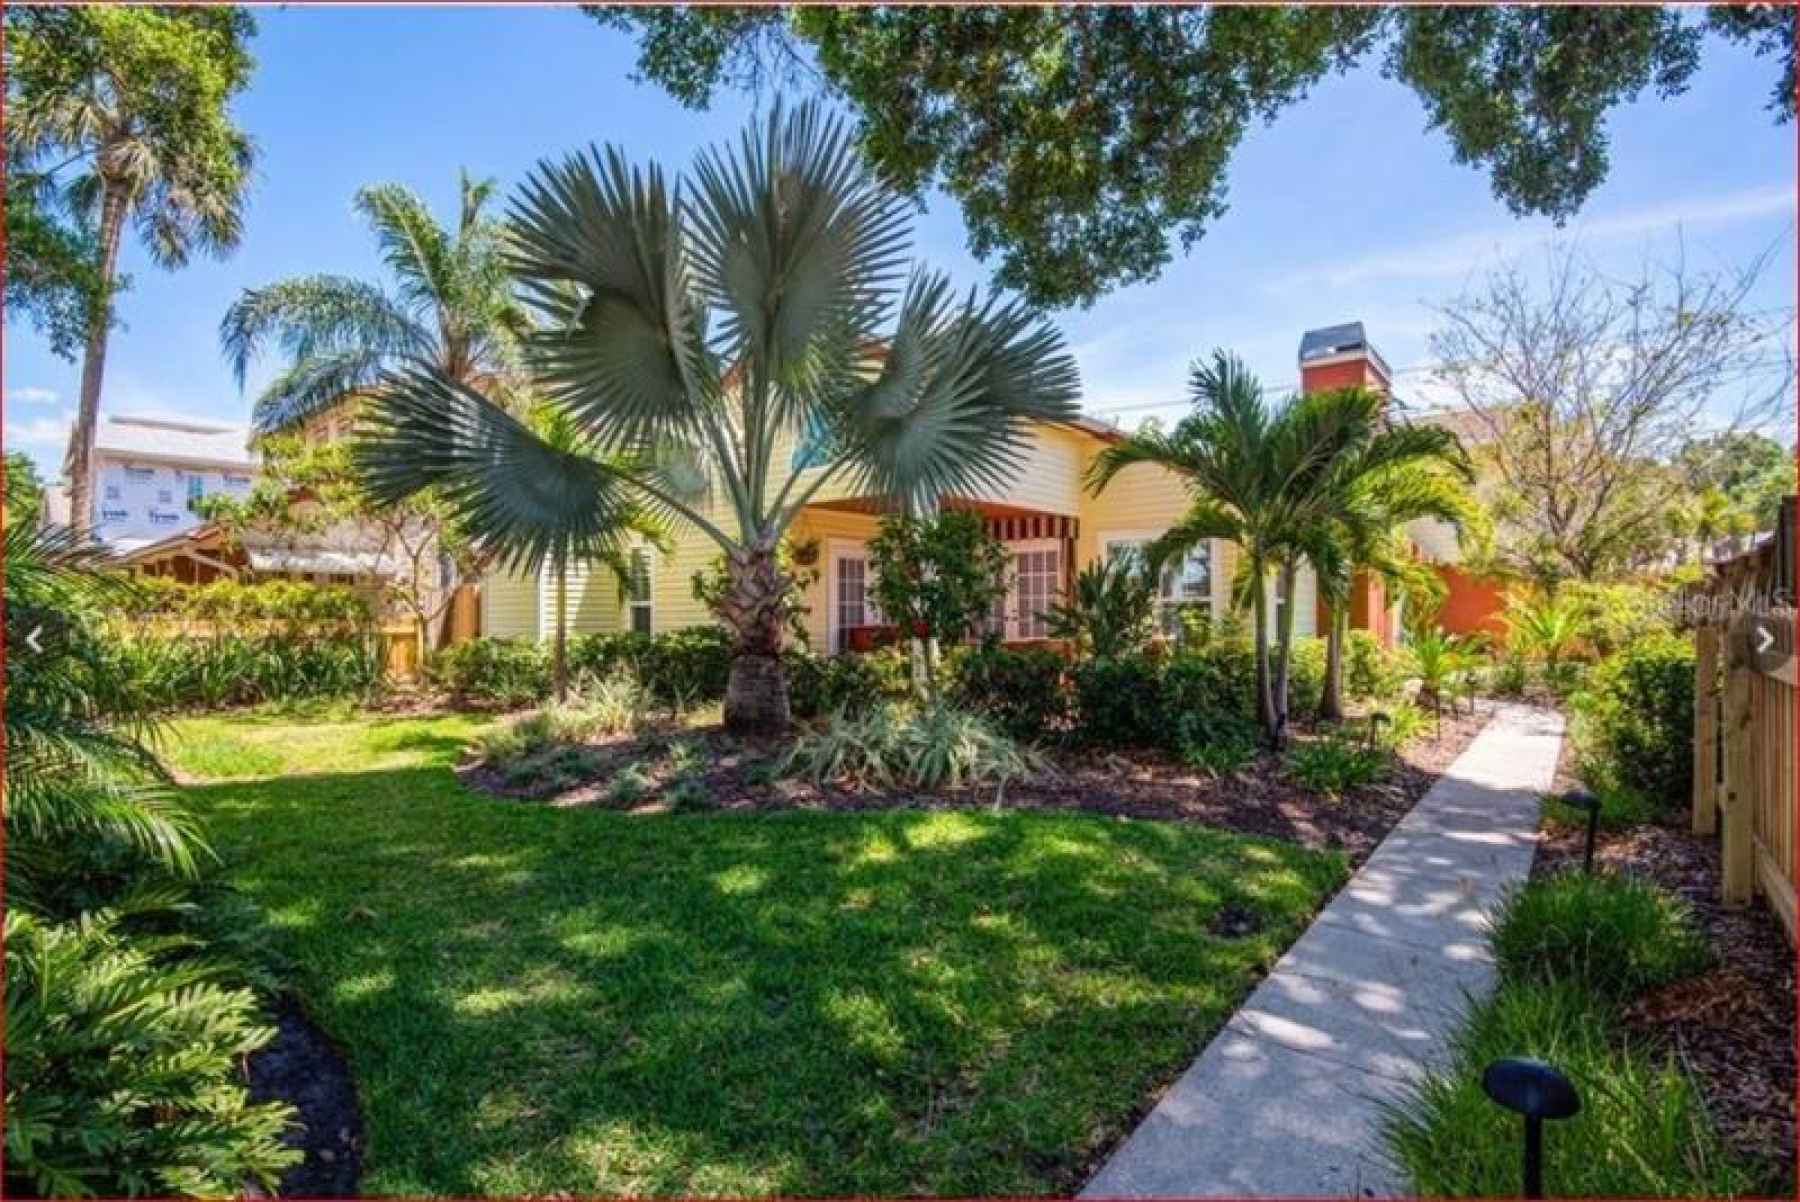 Large Front yard for additional privacy